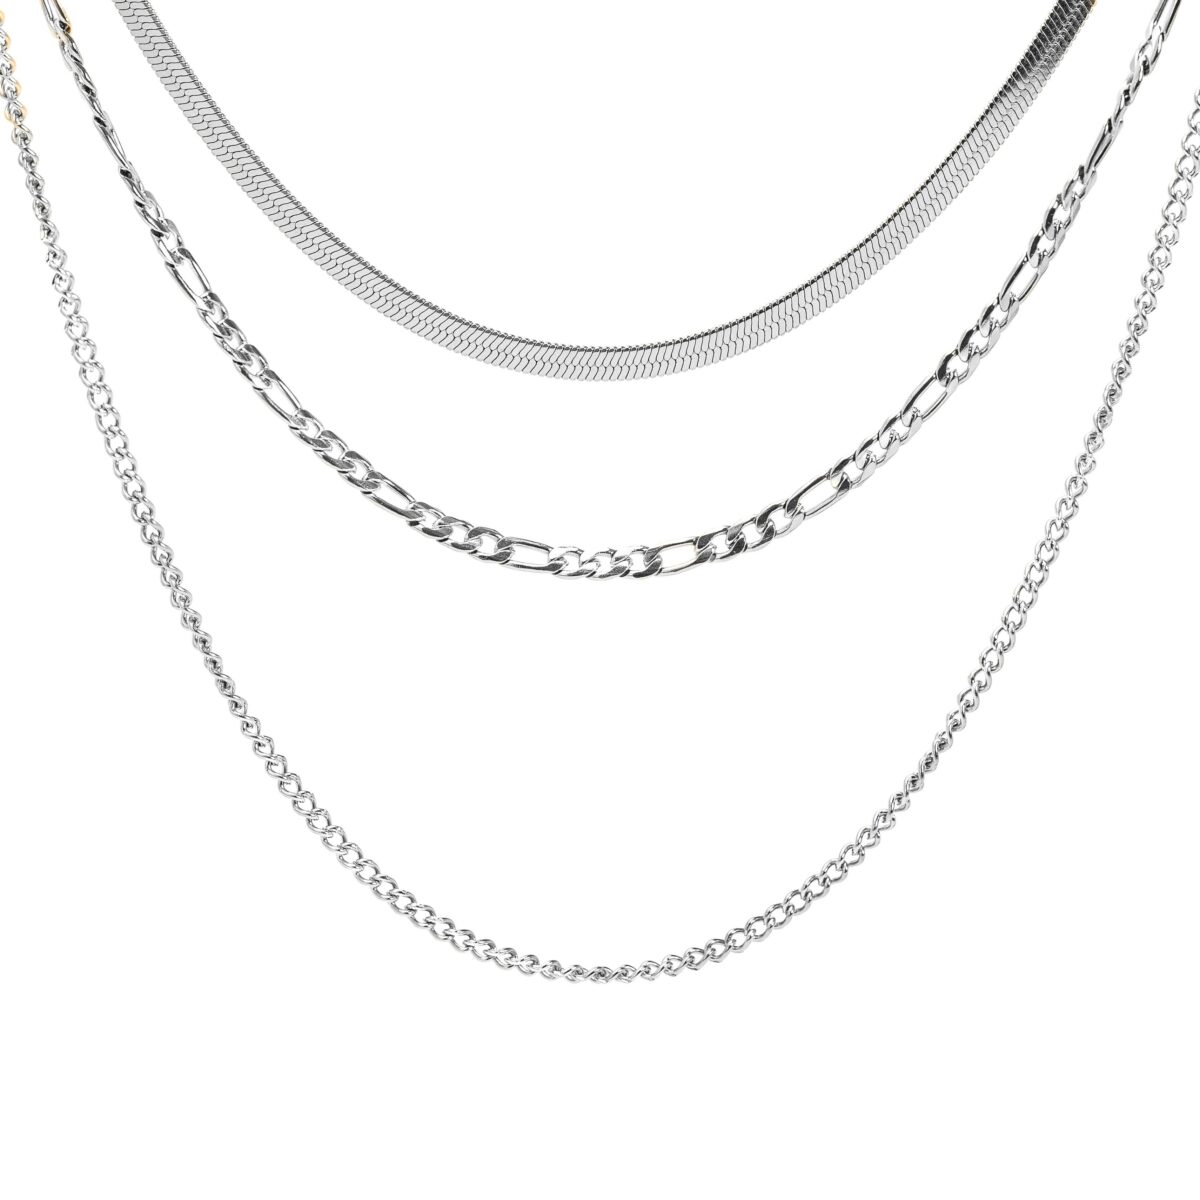 https://m.clubbella.co/product/layered-silver-chain-necklace/ Resized (10 of 134)